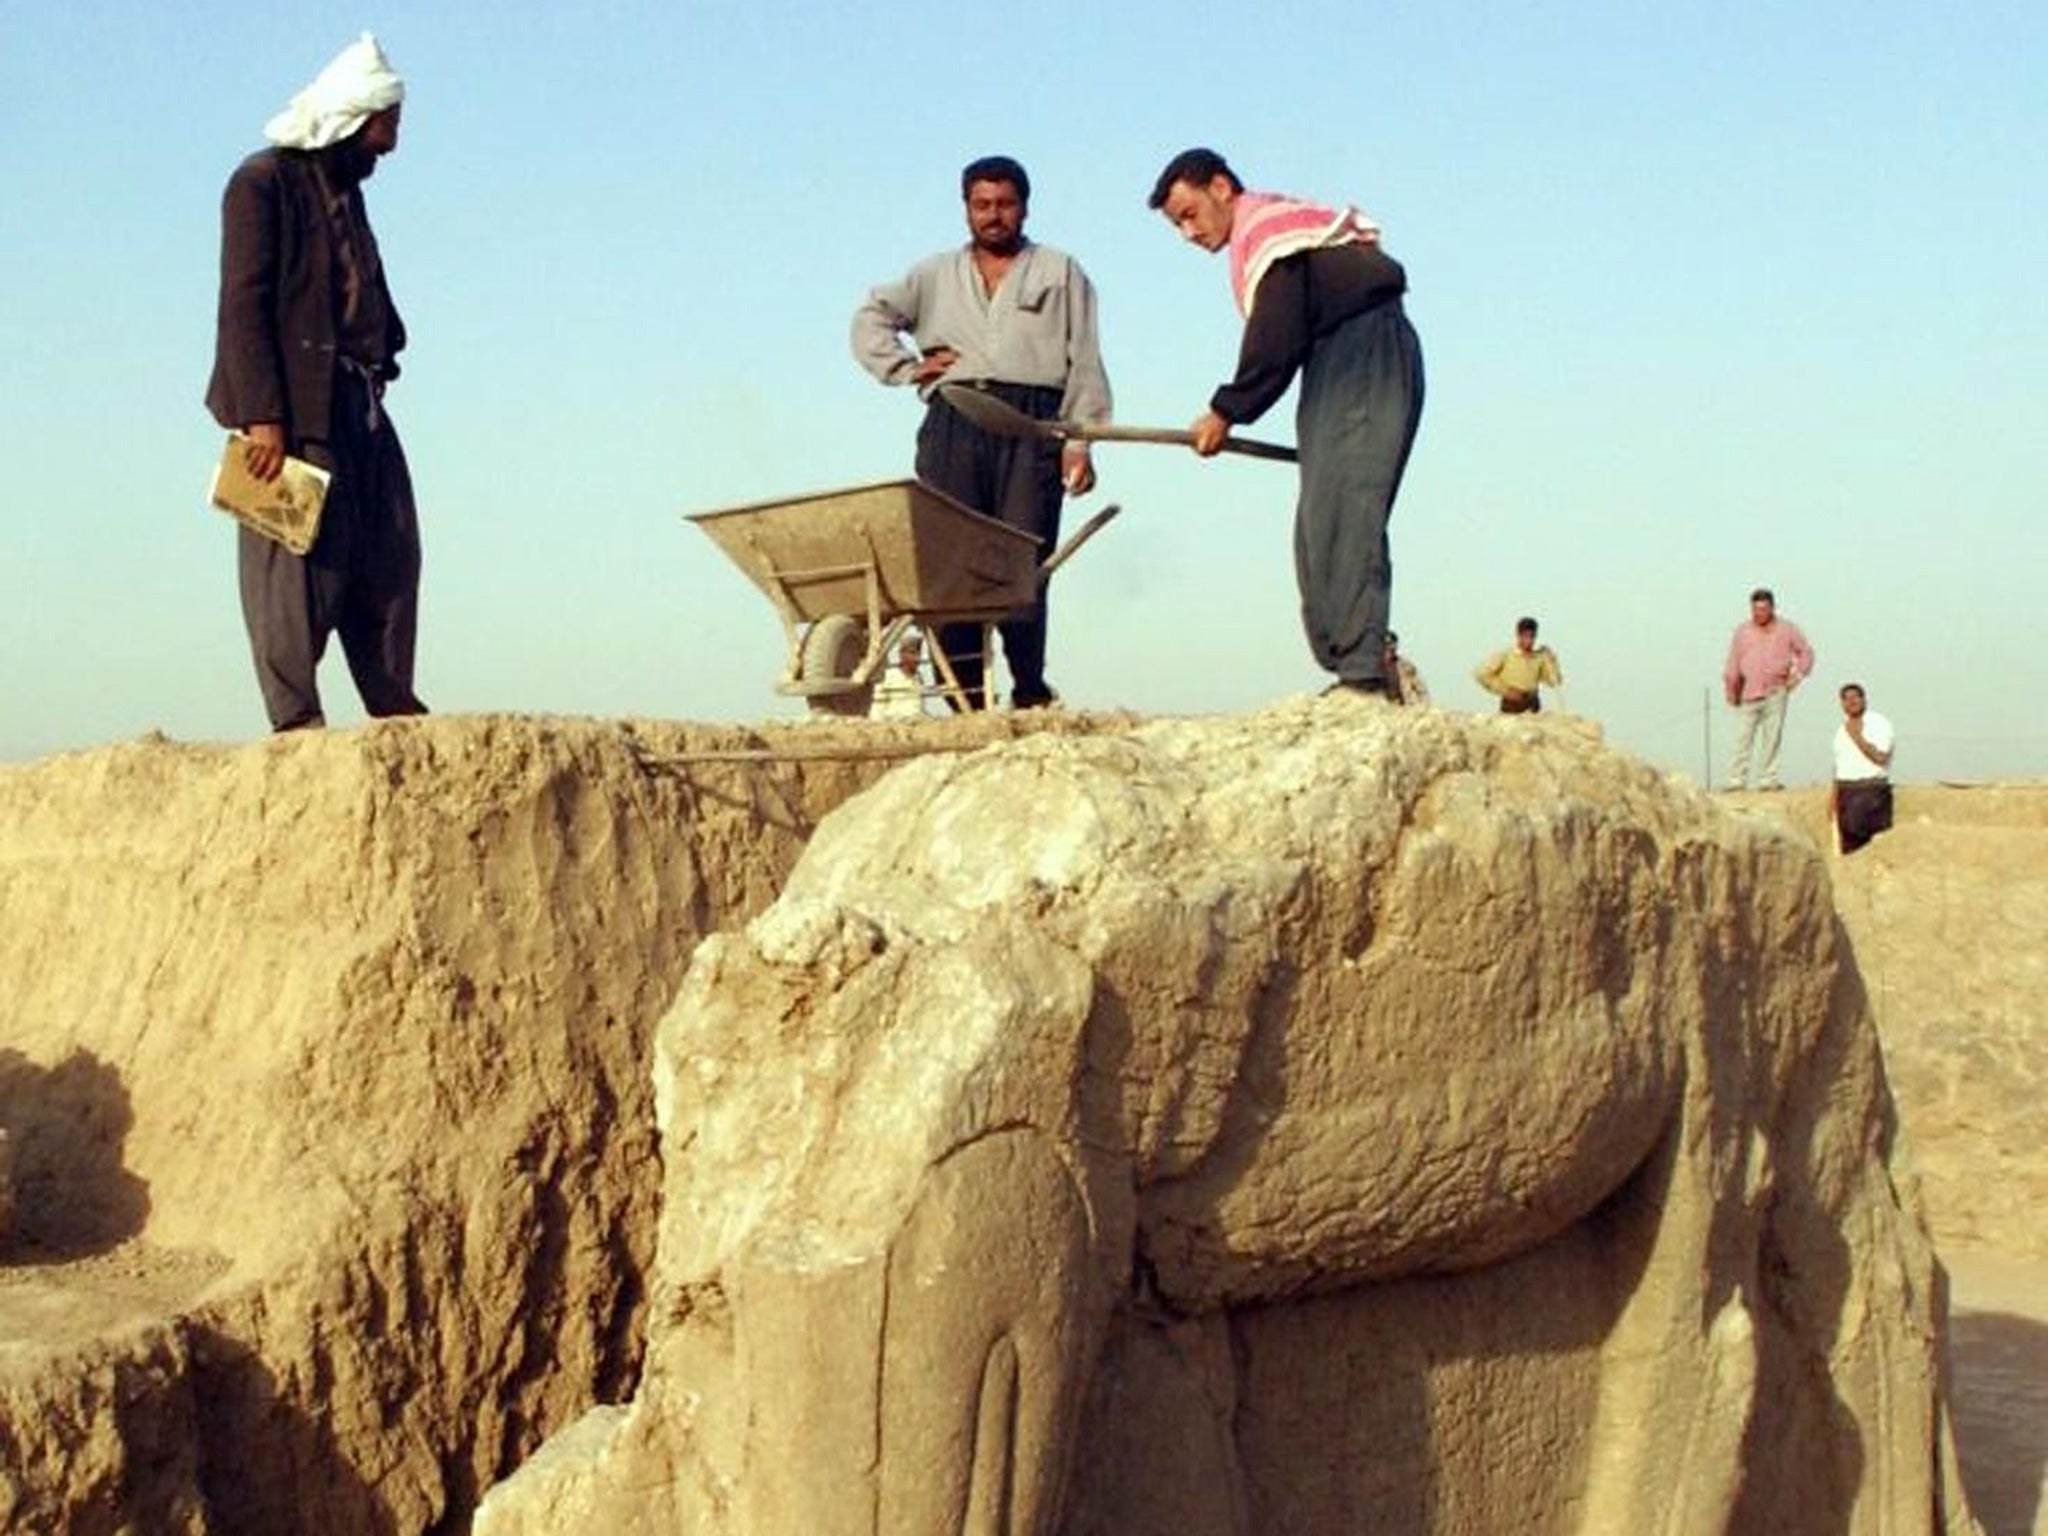 Isis militants have bulldozed the ancient city of Nimrud, pictured here undergoing maintenance in 2001